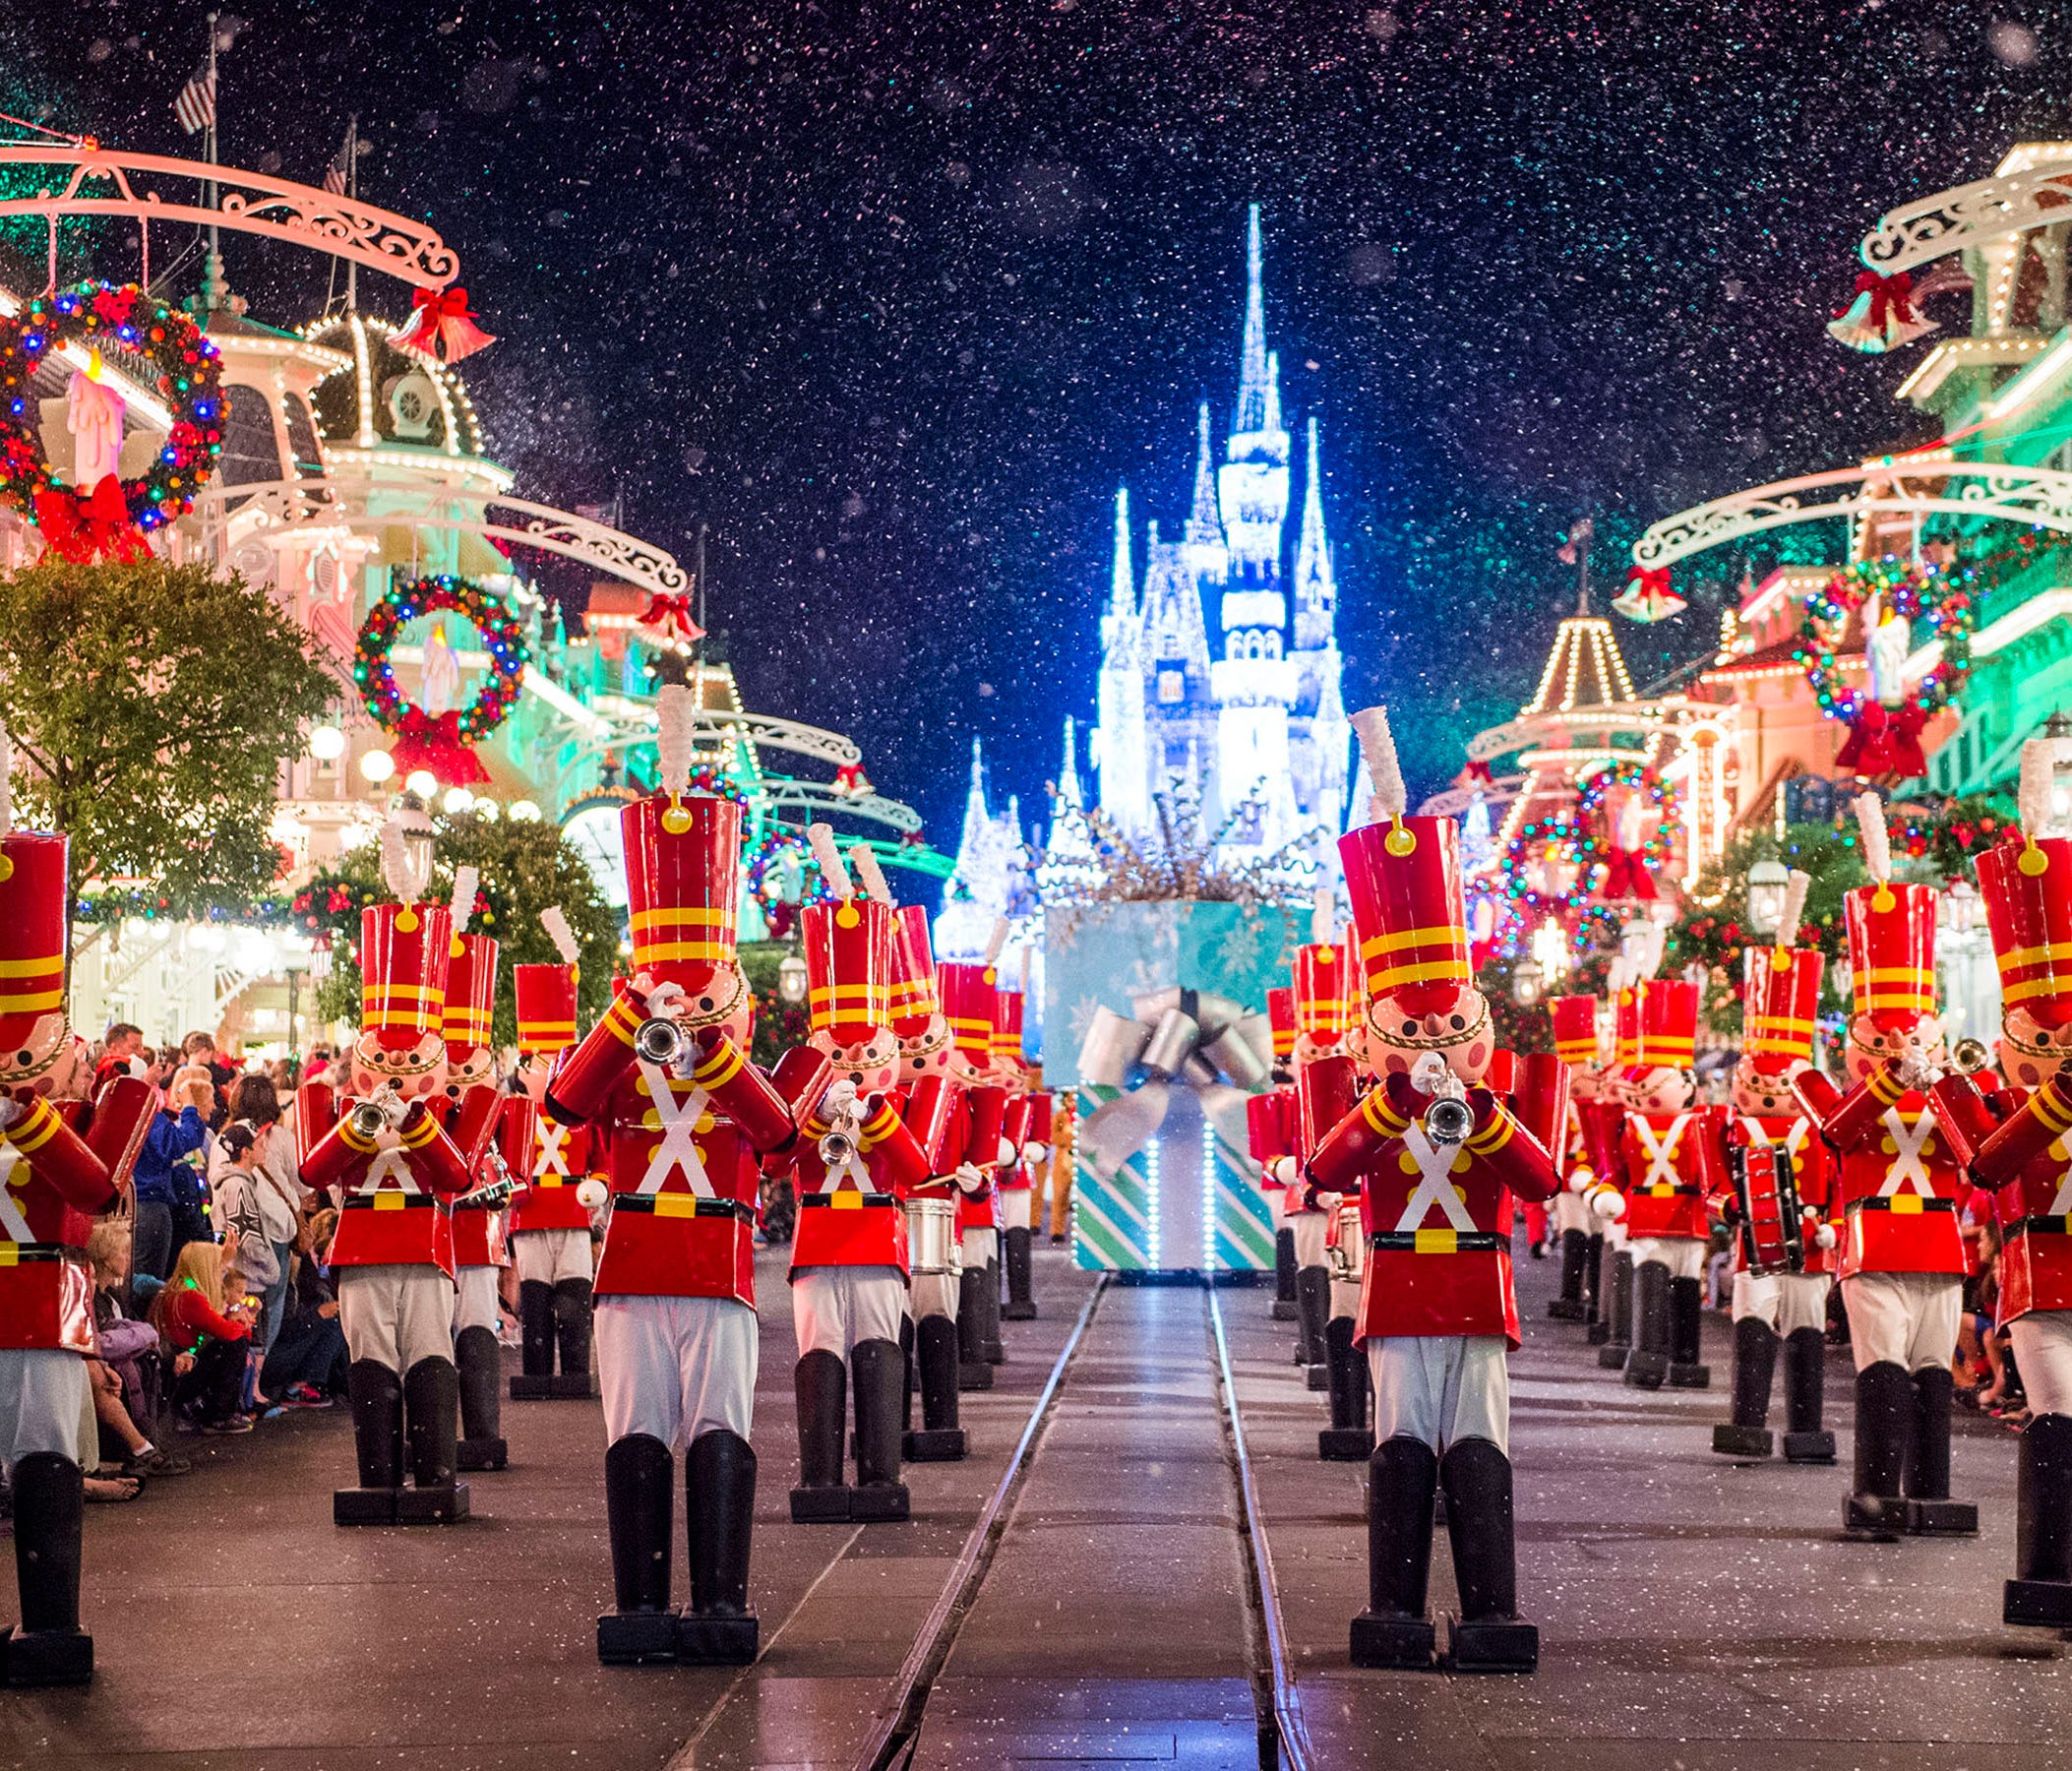 Toy soldiers parade down Main Street, U.S.A., at Magic Kingdom during 